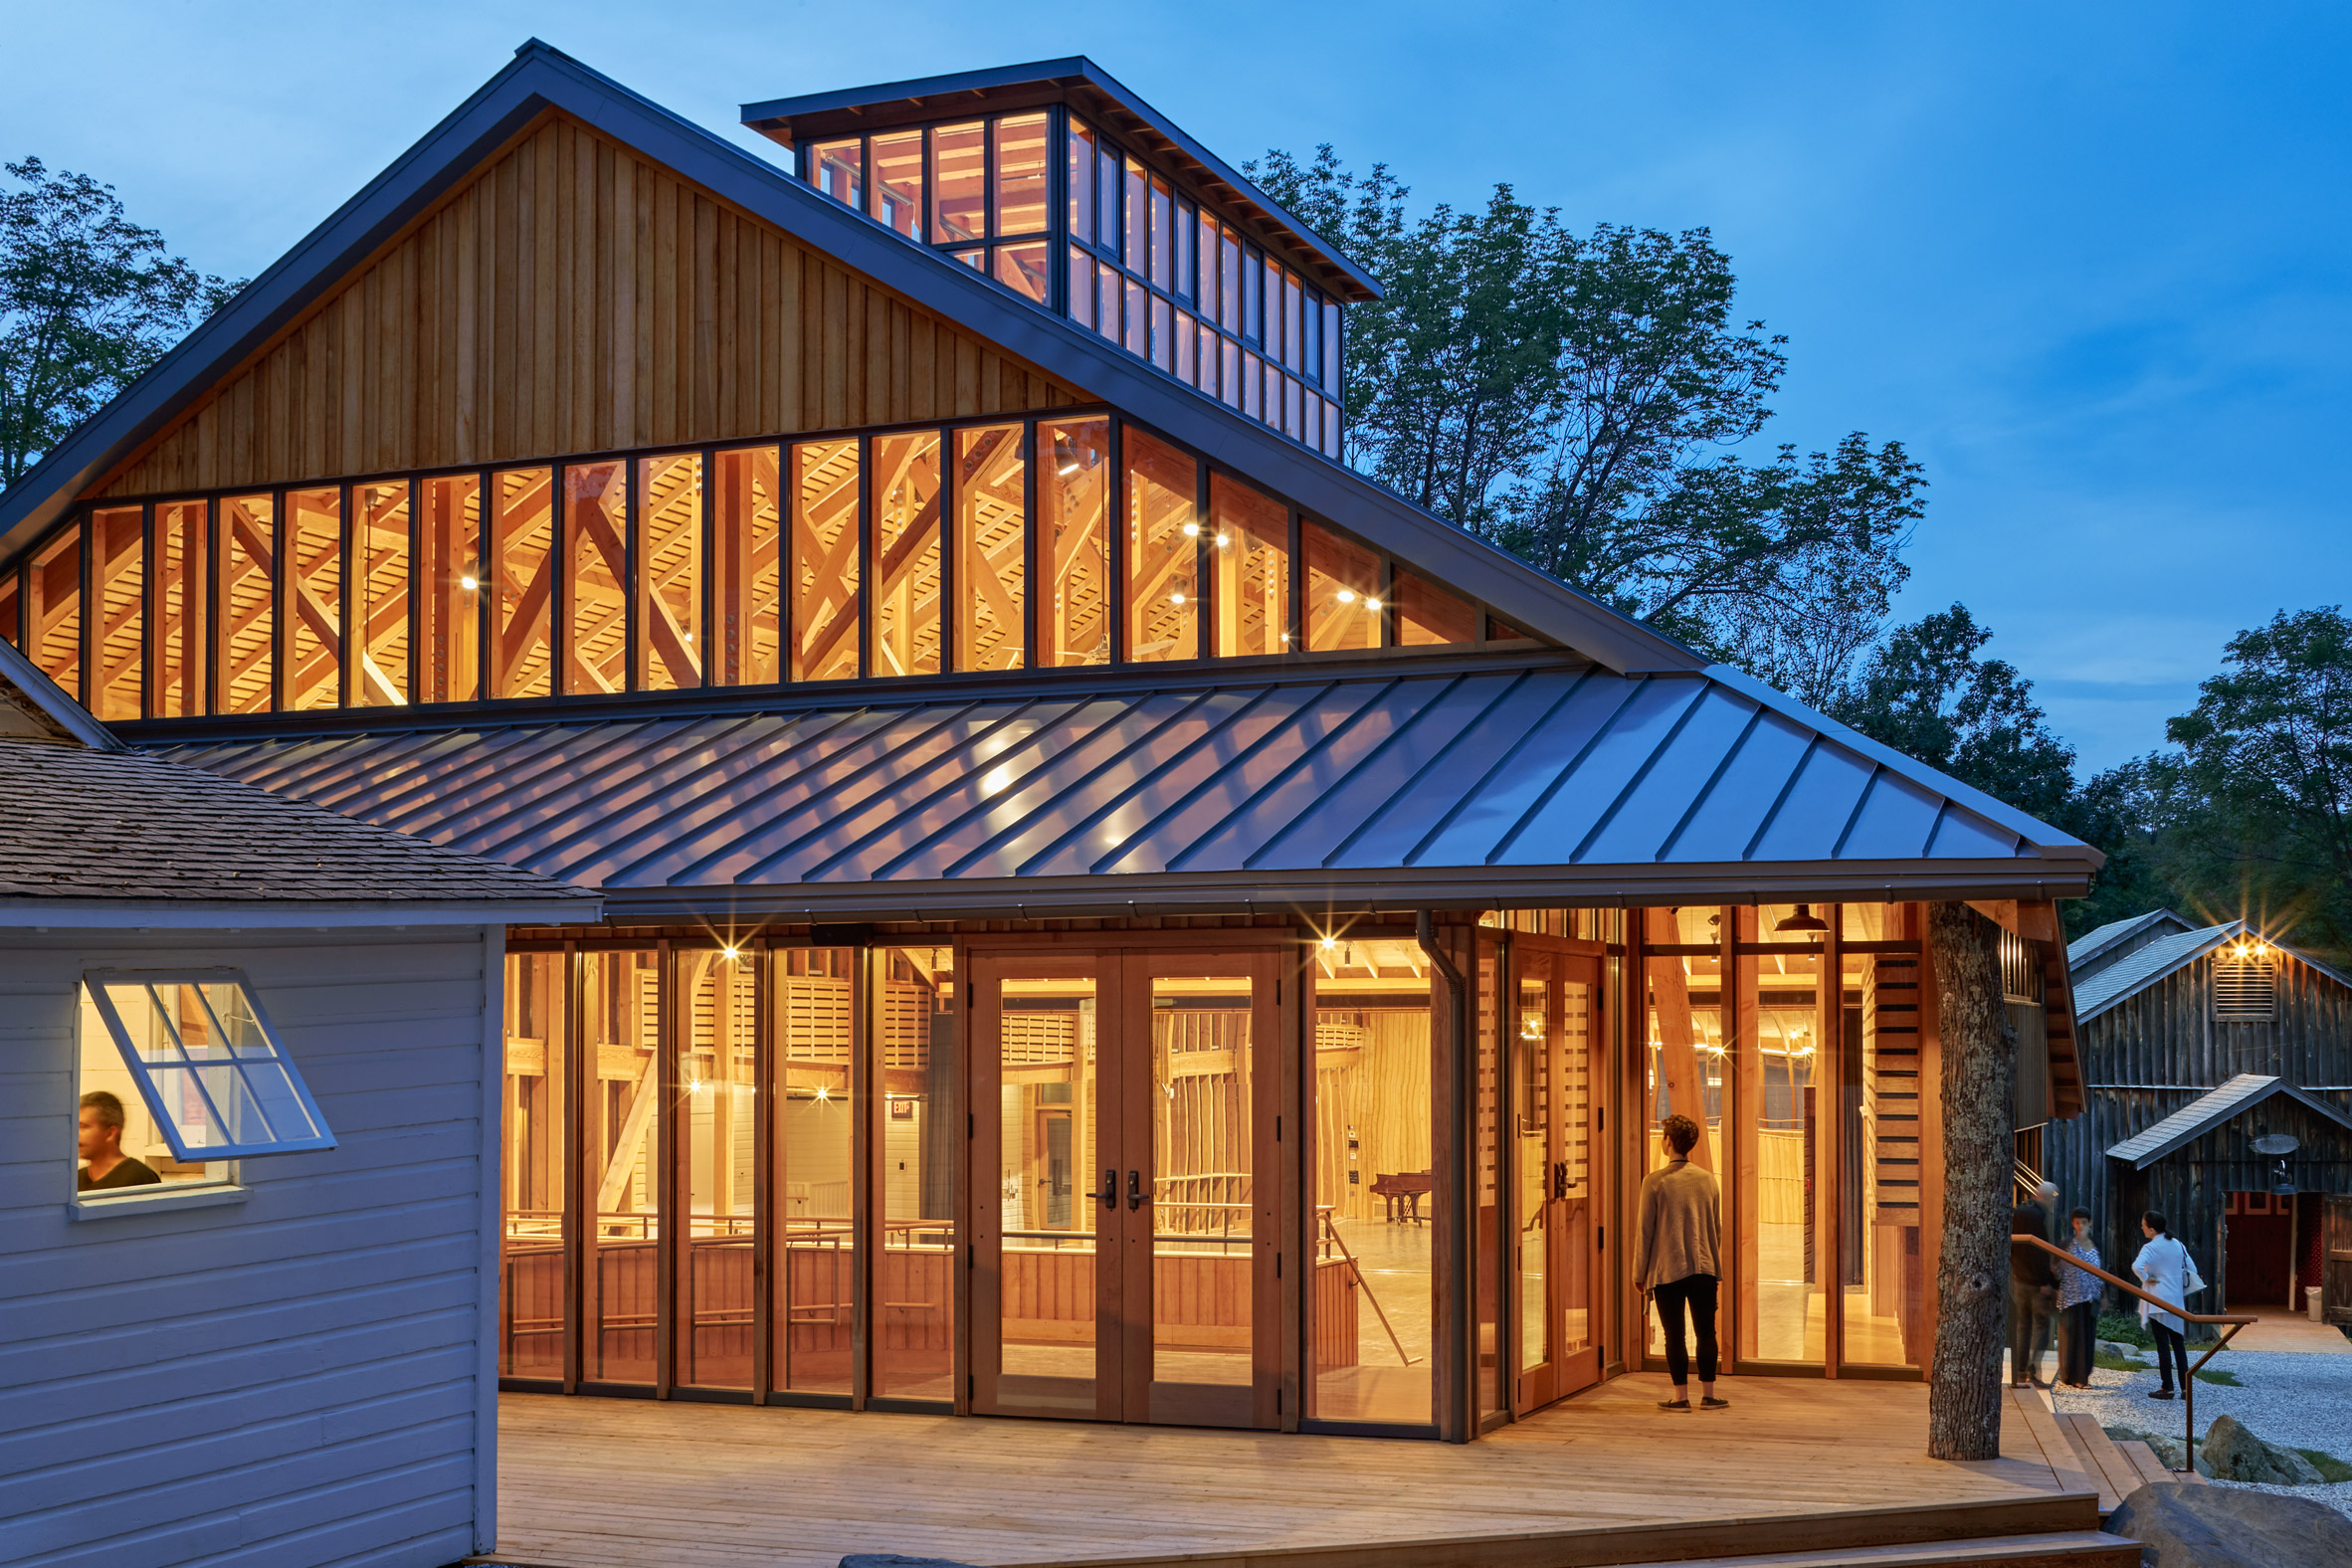 Flansburgh Architects takes cues from wooden barns for dance studio in the Berkshires